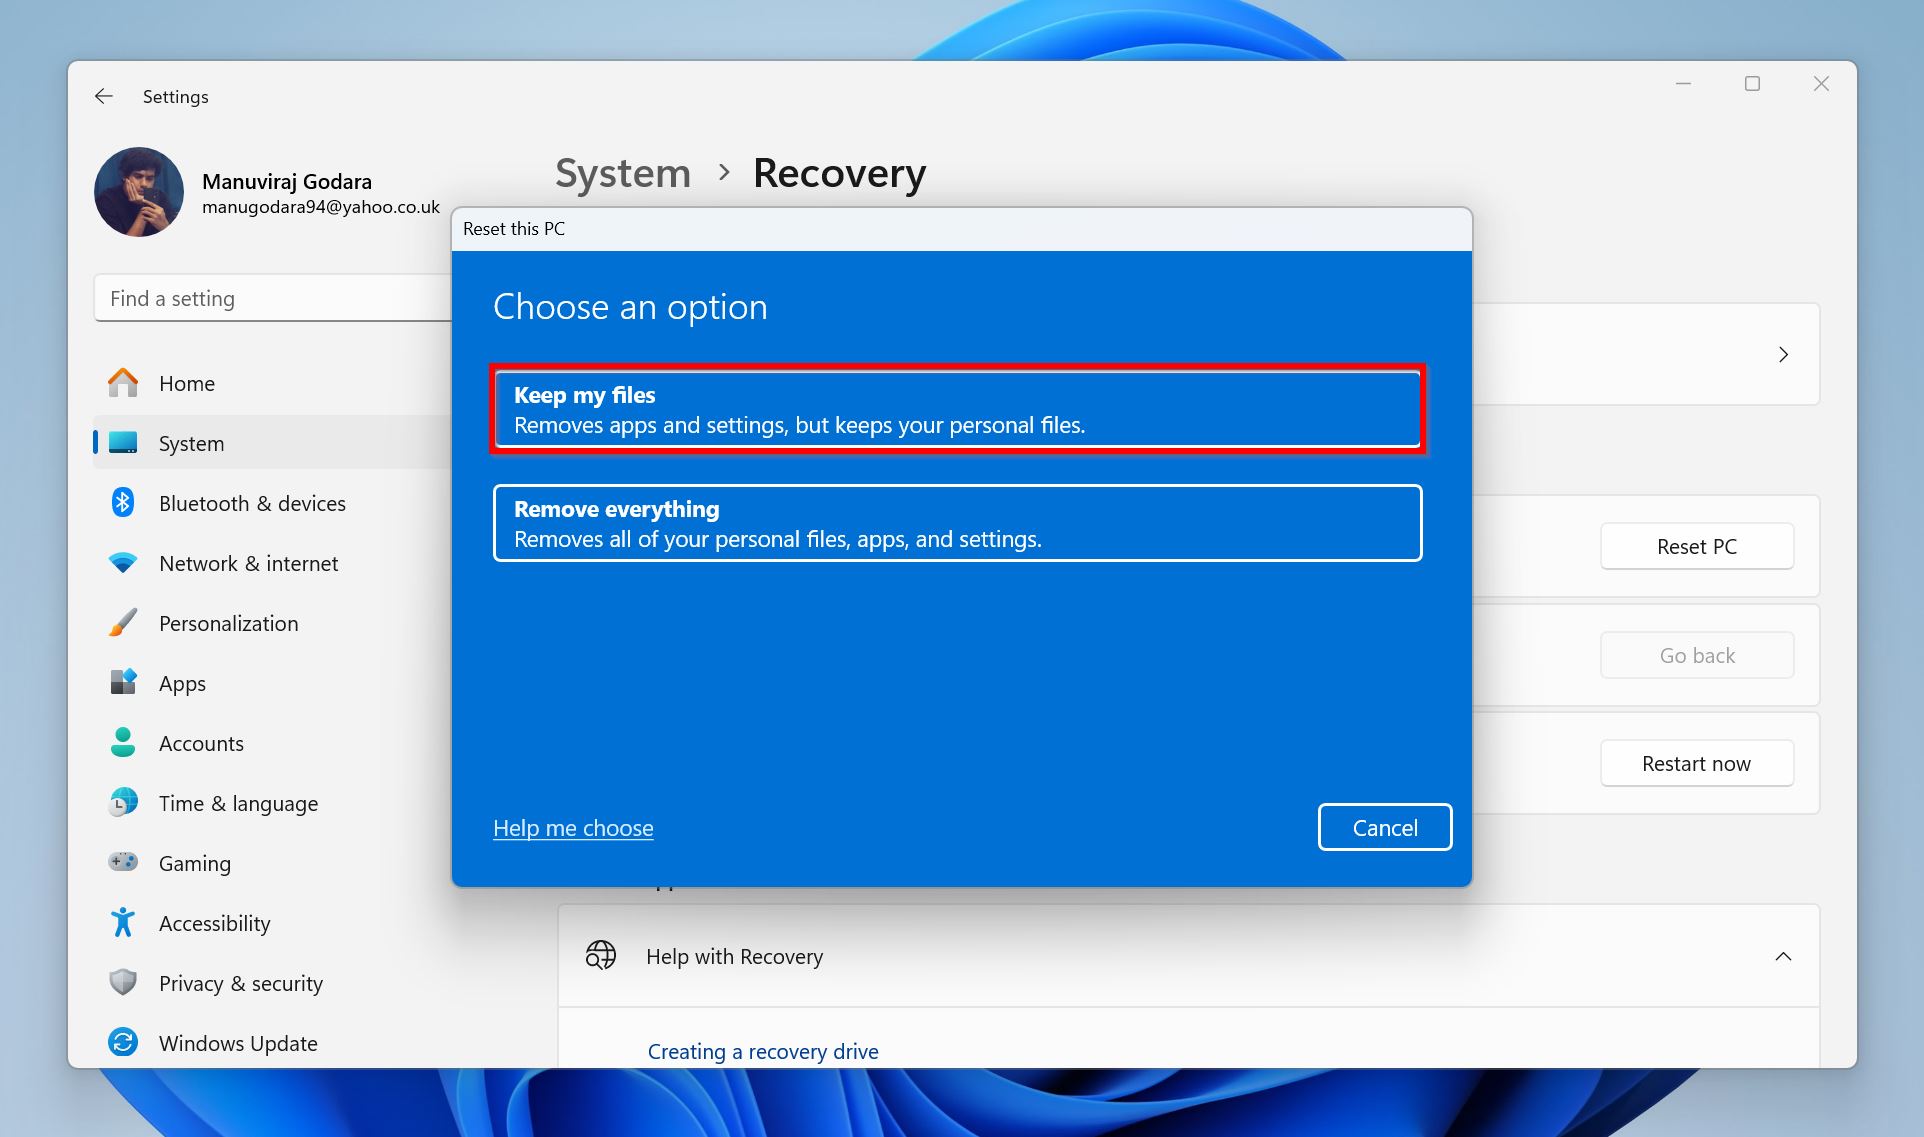 A Windows recovery screen with two main options framed in blue. The first, highlighted in red, is 'Keep my files' which removes apps and settings but keeps personal files. The second is 'Remove everything', which removes all personal files, apps, and settings.